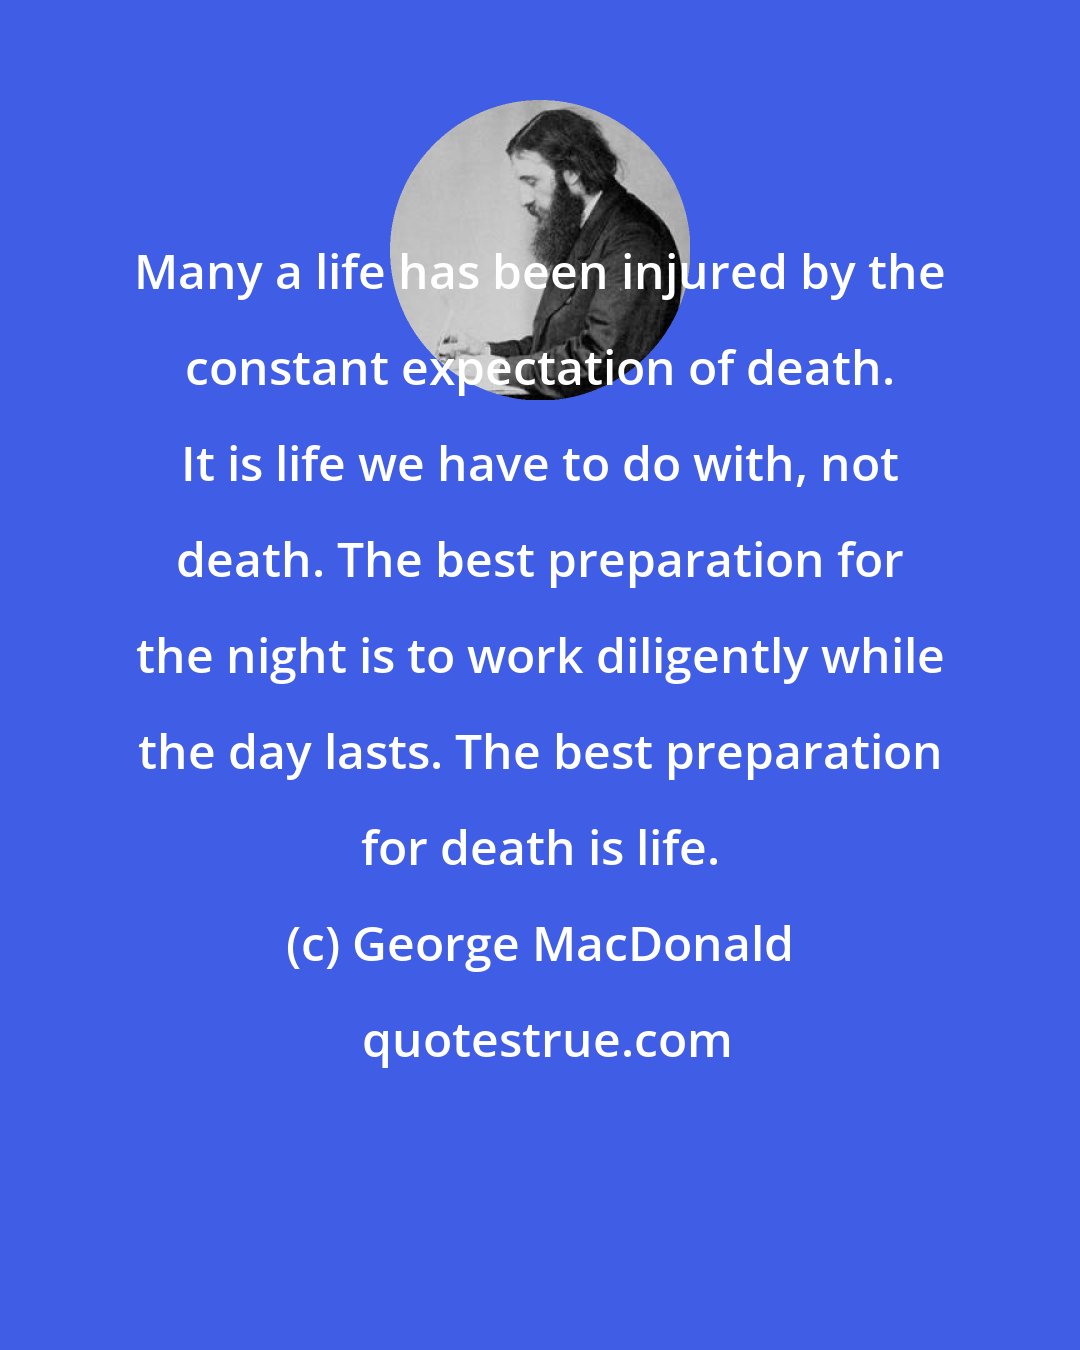 George MacDonald: Many a life has been injured by the constant expectation of death. It is life we have to do with, not death. The best preparation for the night is to work diligently while the day lasts. The best preparation for death is life.